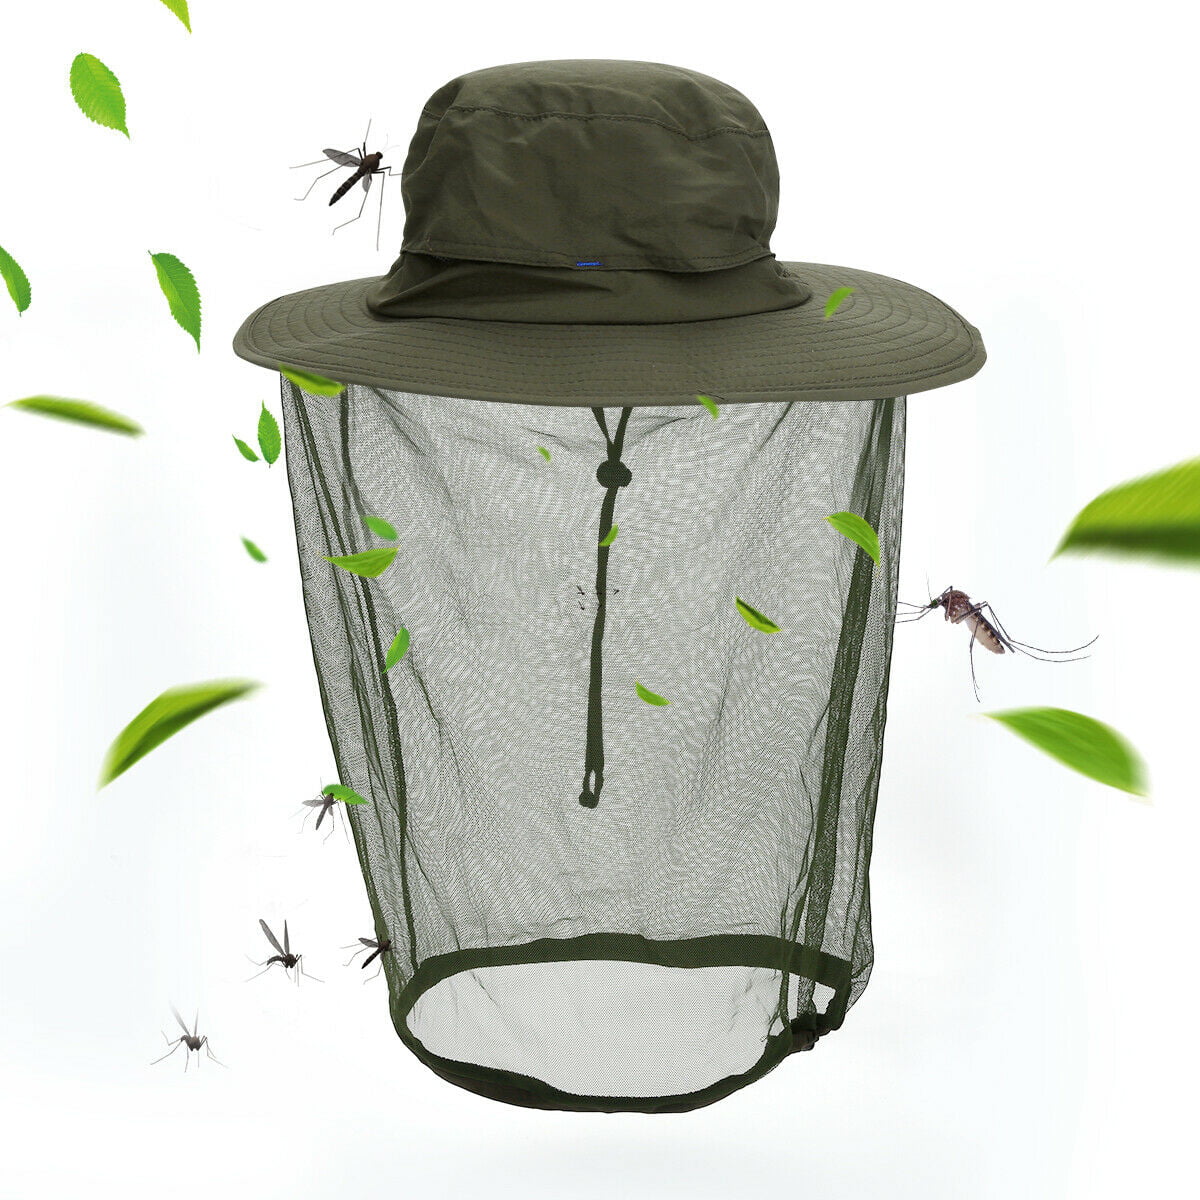 Mosquito Head Net Hat with Hidden Mesh Protection Bugs Bees for Hiking Fishing 